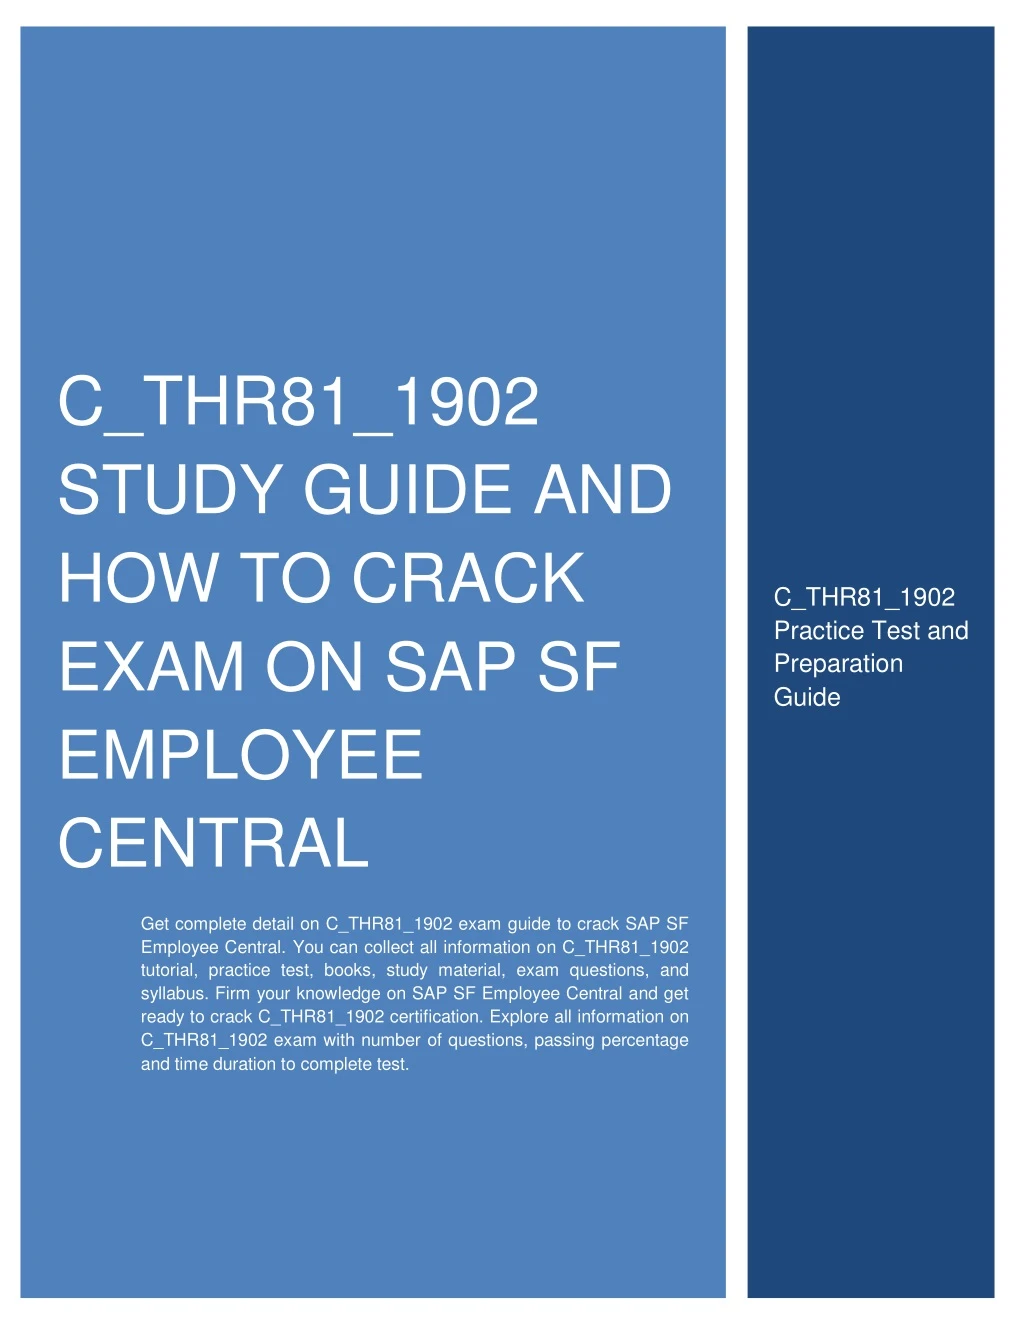 c thr81 1902 study guide and how to crack exam